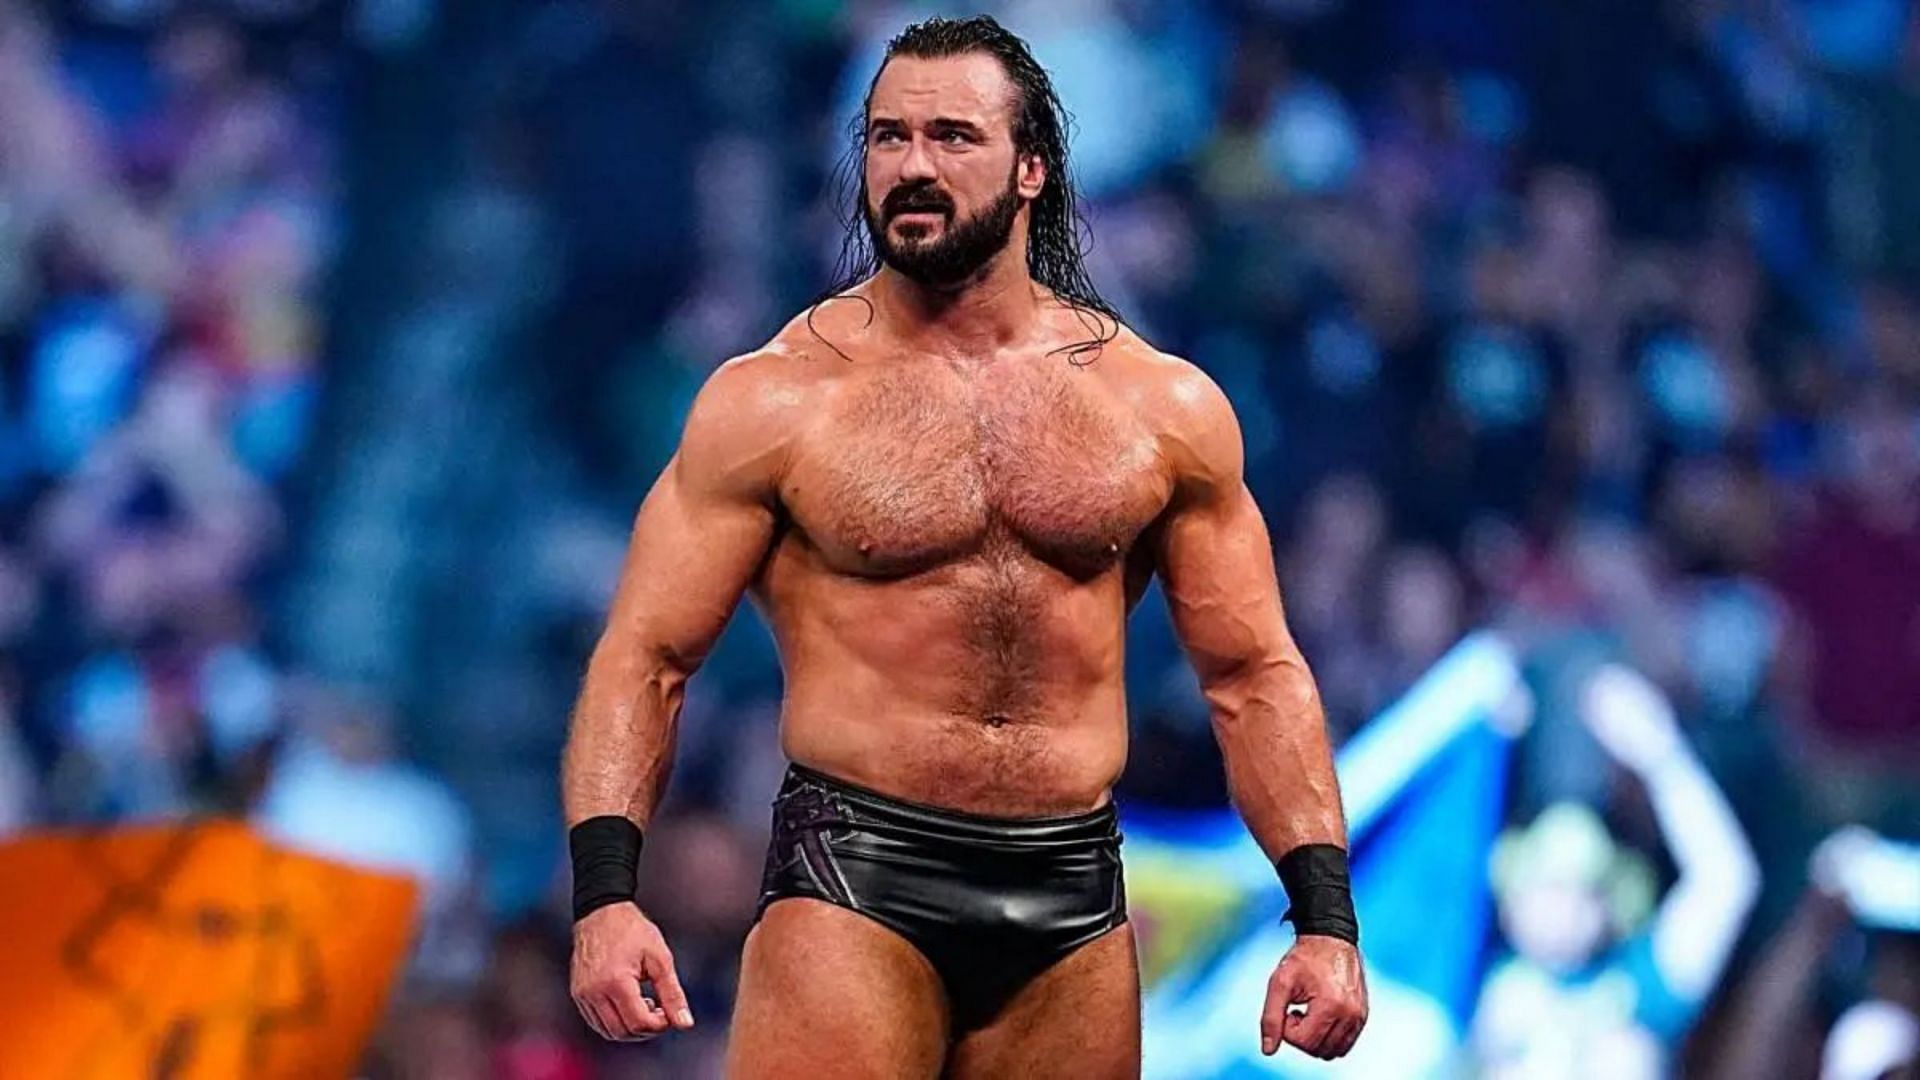 Drew McIntyre is a former NXT Champion